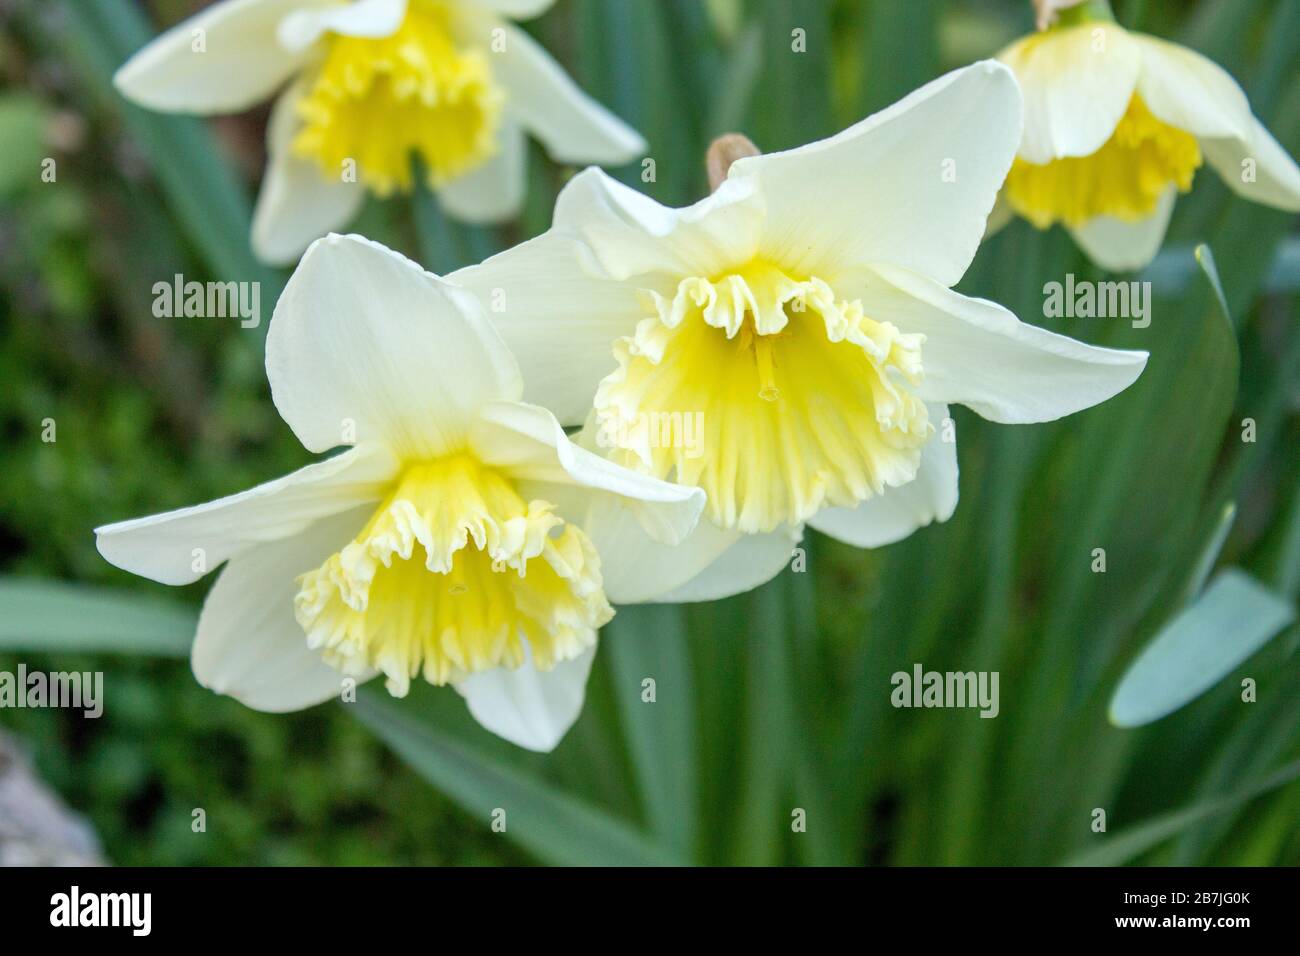 The yellow-white daffodil, also known as lent lily, is the best known plant from the daffodil genus within the amaryllis family. Stock Photo